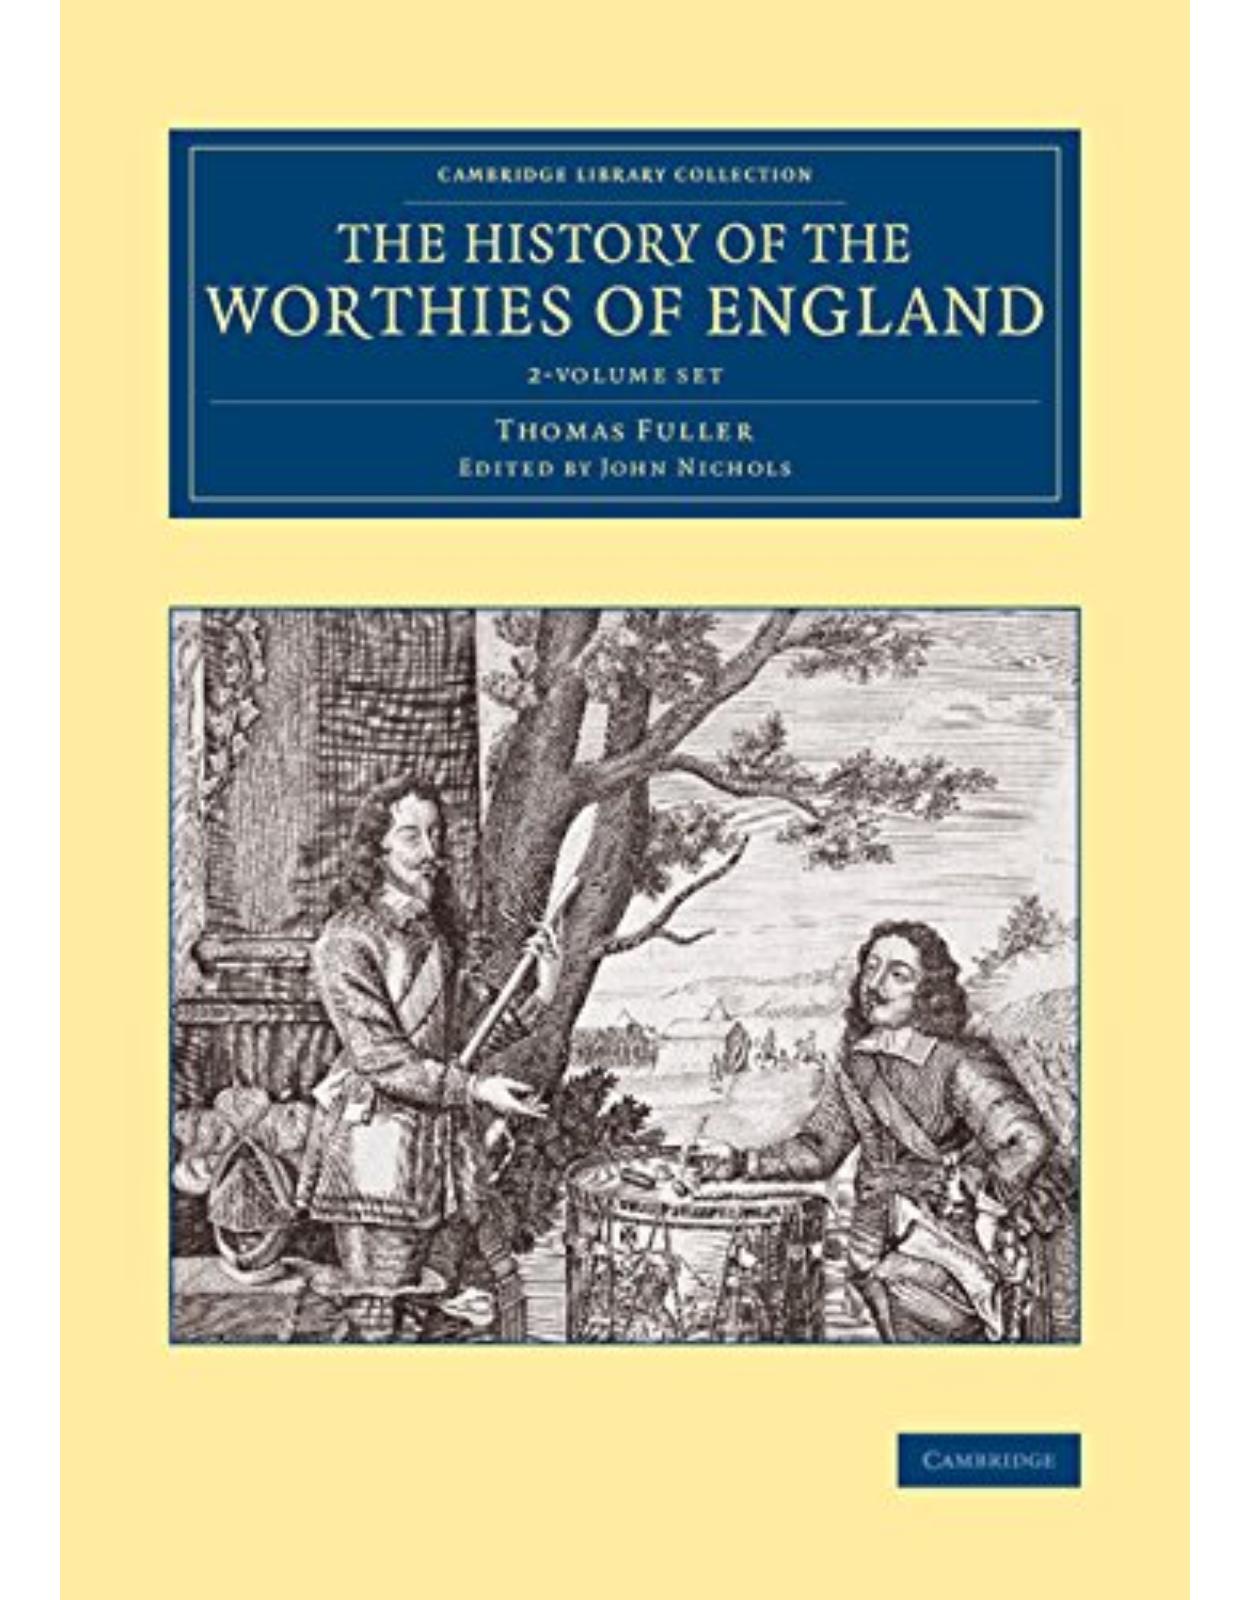 The History of the Worthies of England 2 Volume Set (Cambridge Library Collection - British and Irish History, General)